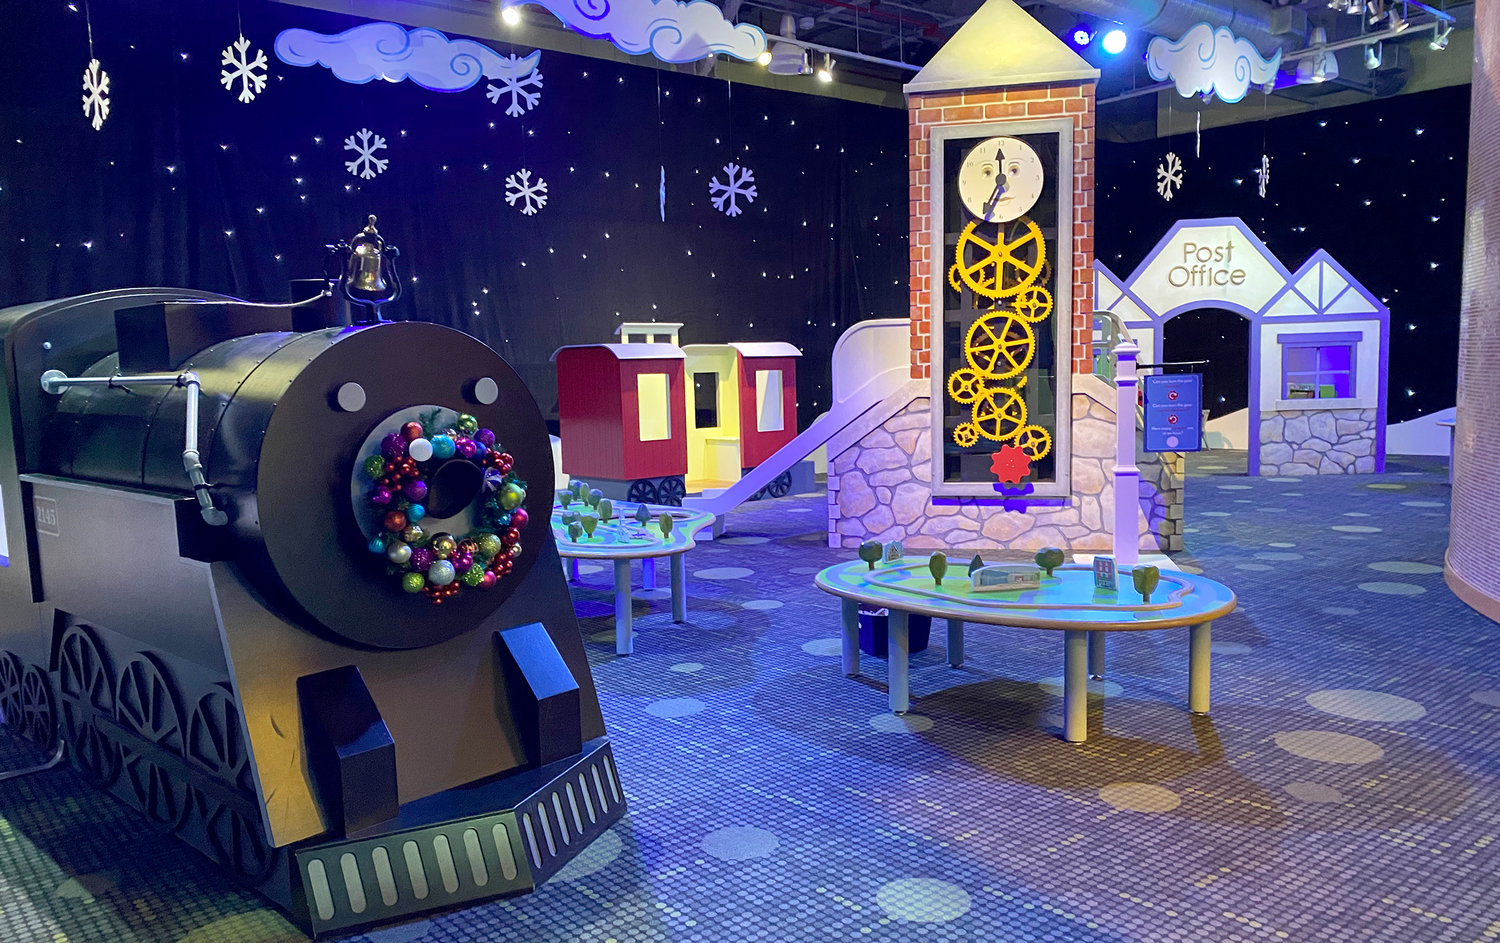 Mississippi Children’s Museum’s Journey to the North Pole exhibit opens on Monday.